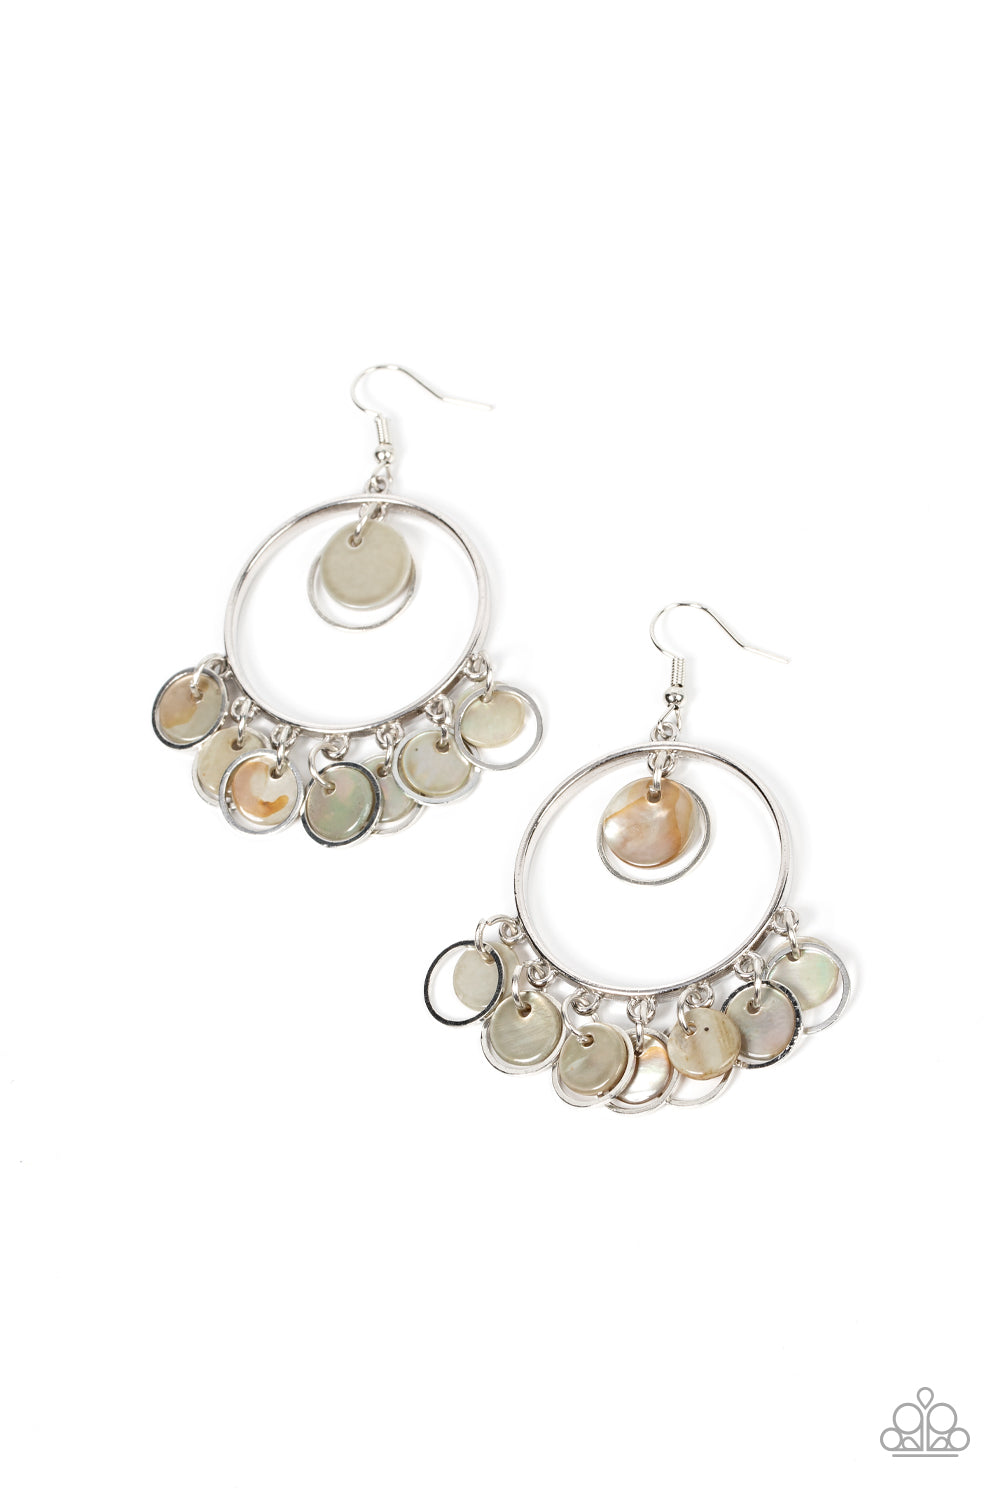 Cabana Charm - Silver - Shell Like Earrings - Paparazzi Accessories -  A summery collection of silvery shell-like discs and dainty silver rings dances from the top and bottom of a shiny silver hoop, resulting in a beach inspired fringe fashion earrings. Earring attaches to a standard fishhook fitting.